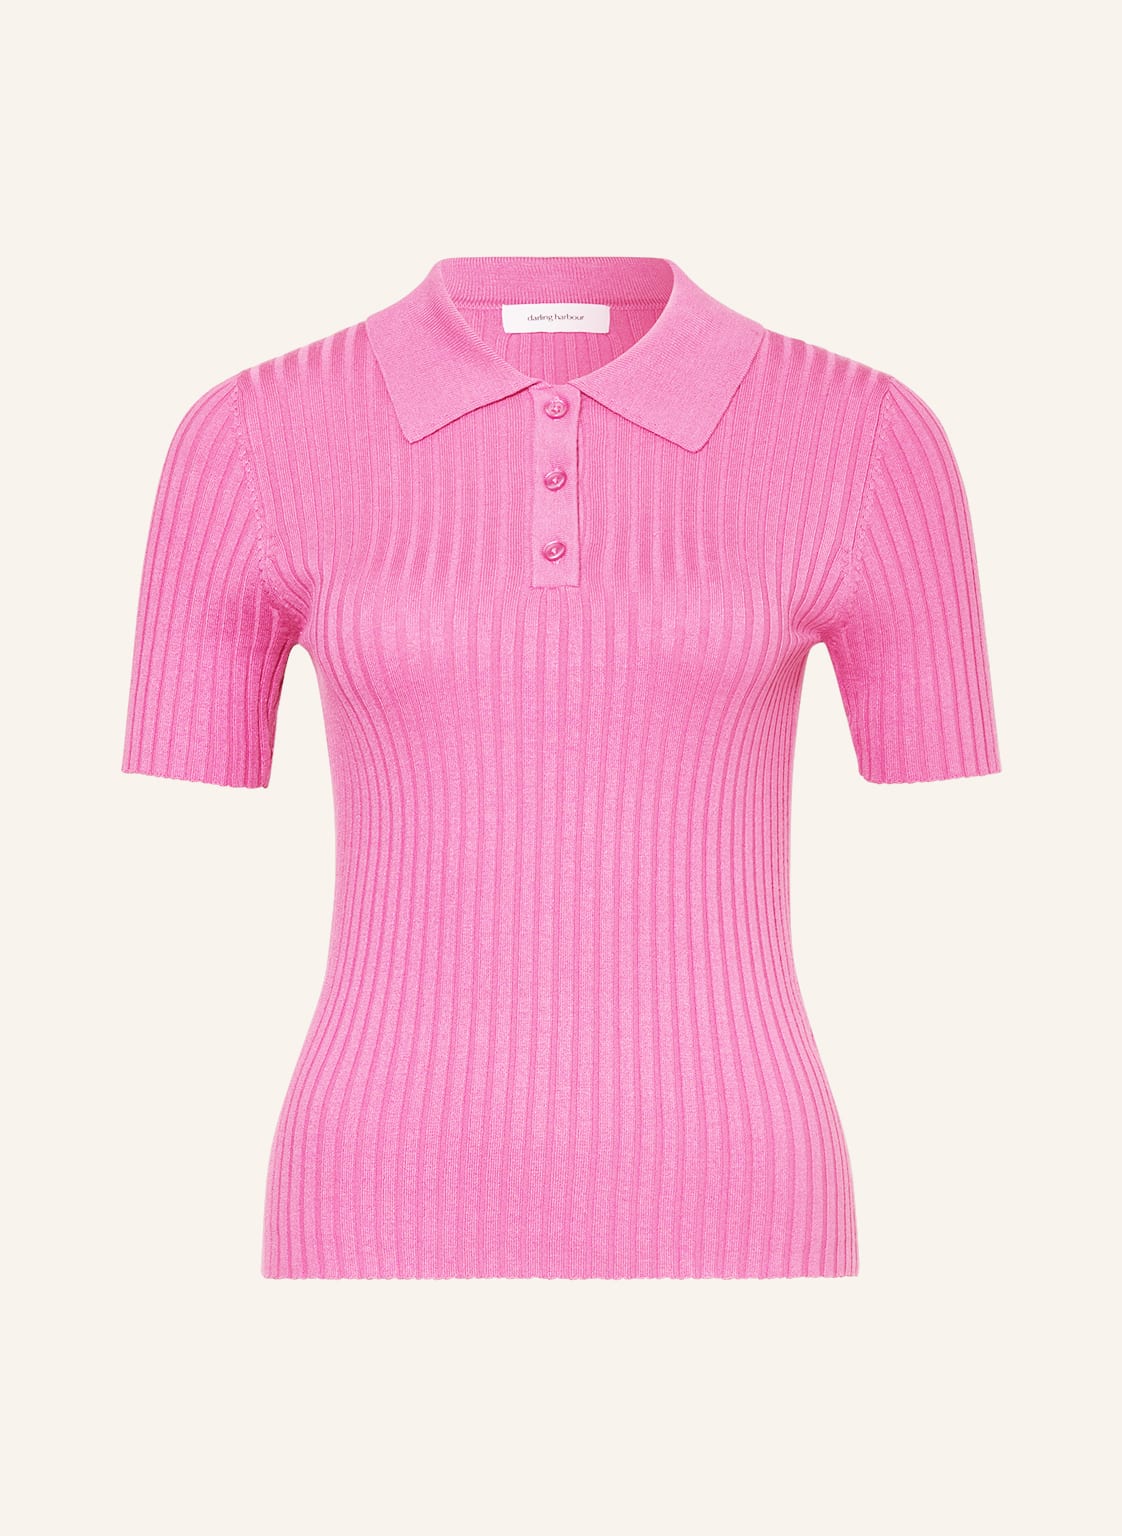 Darling Harbour Strick-Poloshirt rot von darling harbour